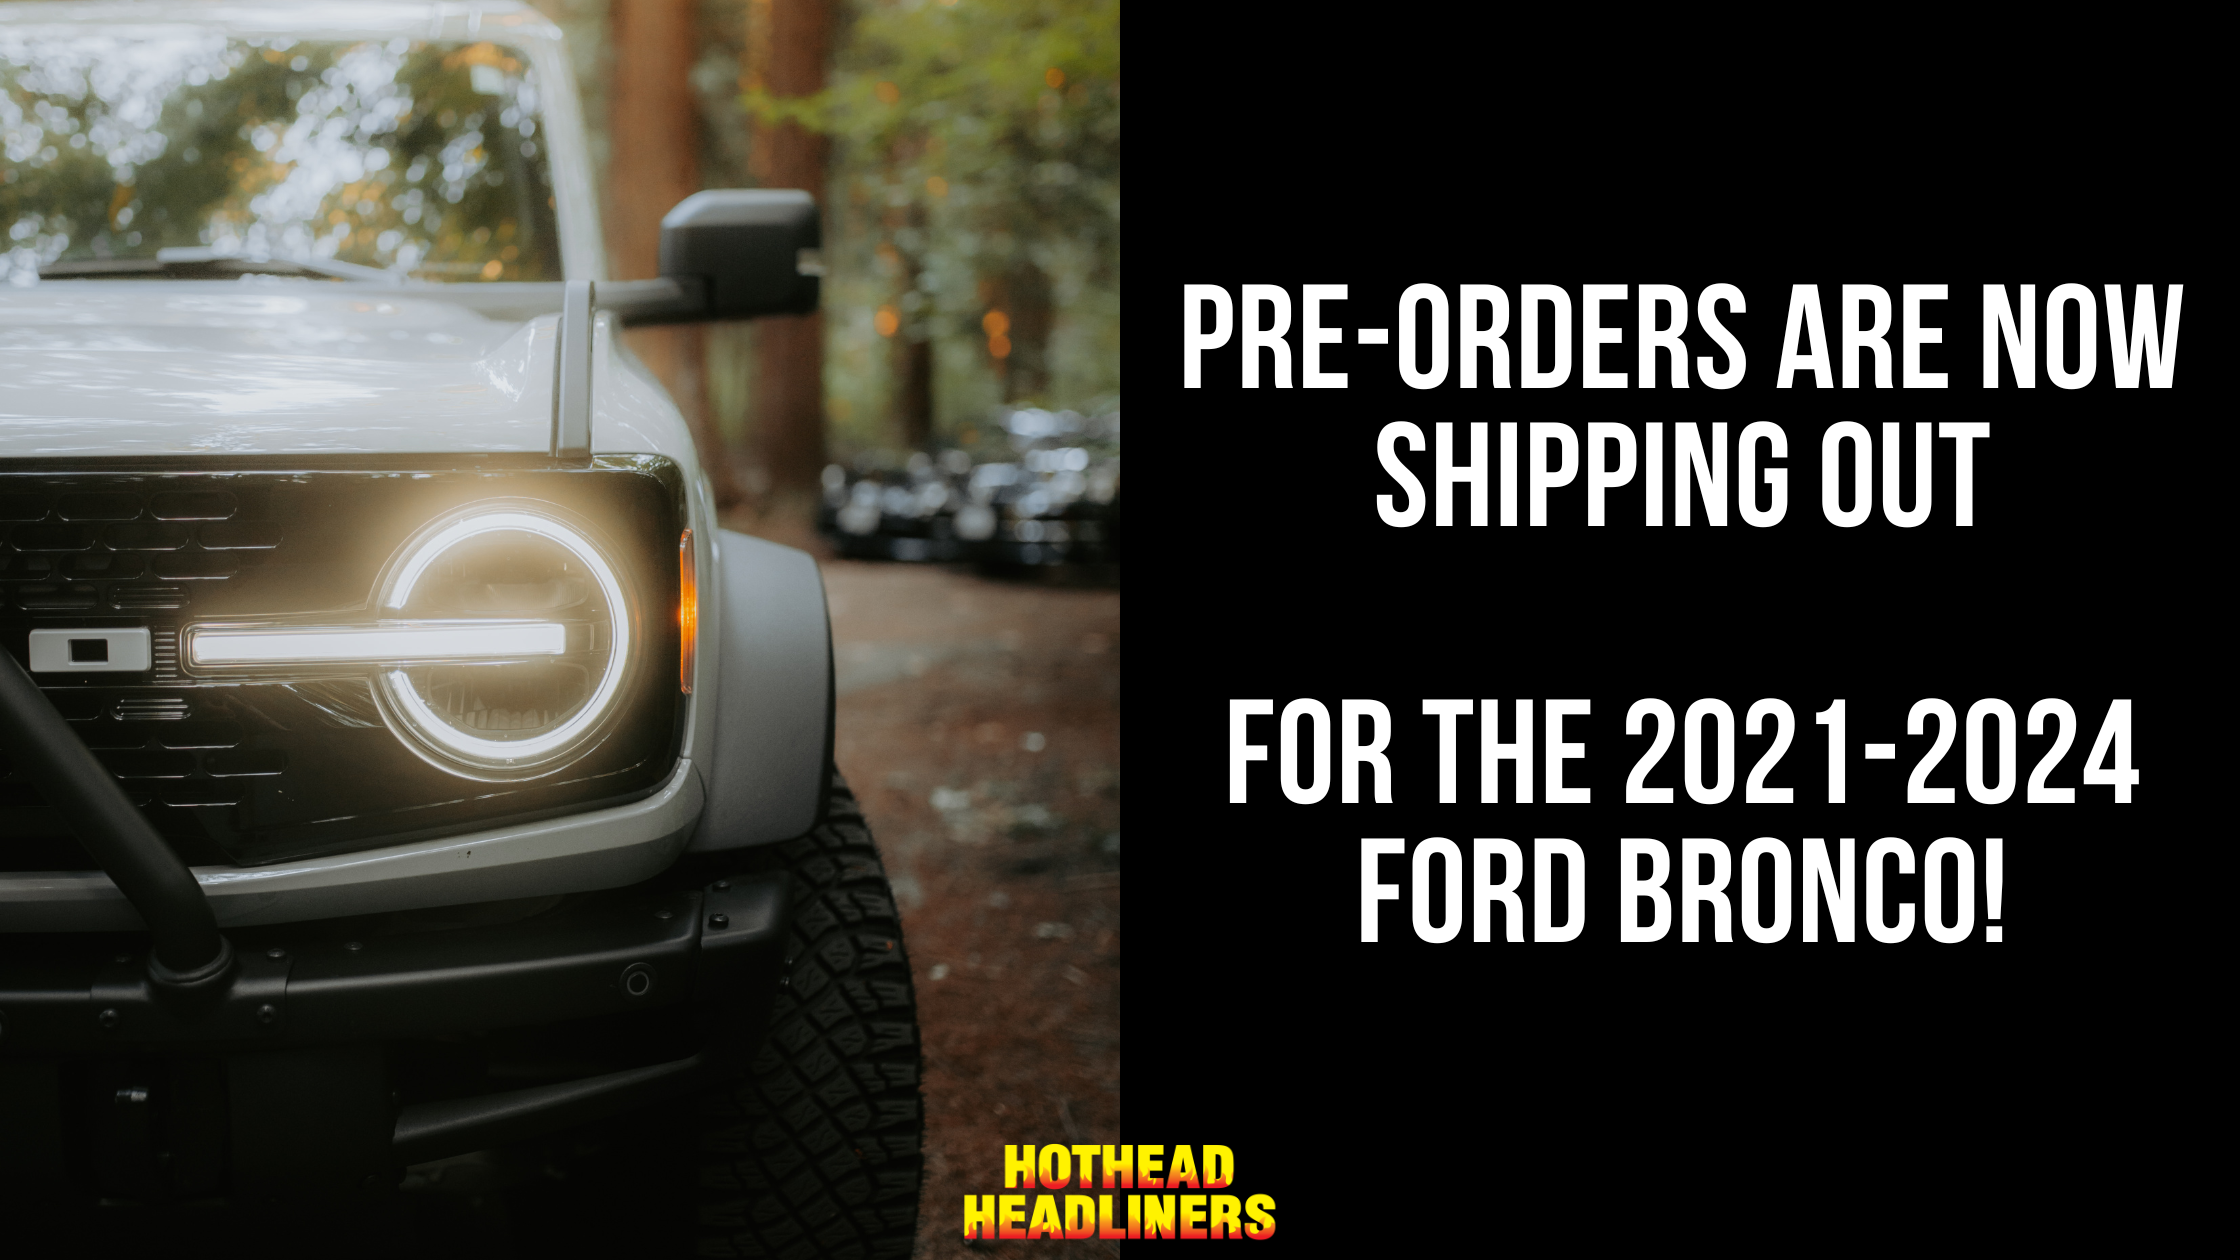 Copy of Introducing Hothead Headliners for the 2021-2024 Ford Bronco.png